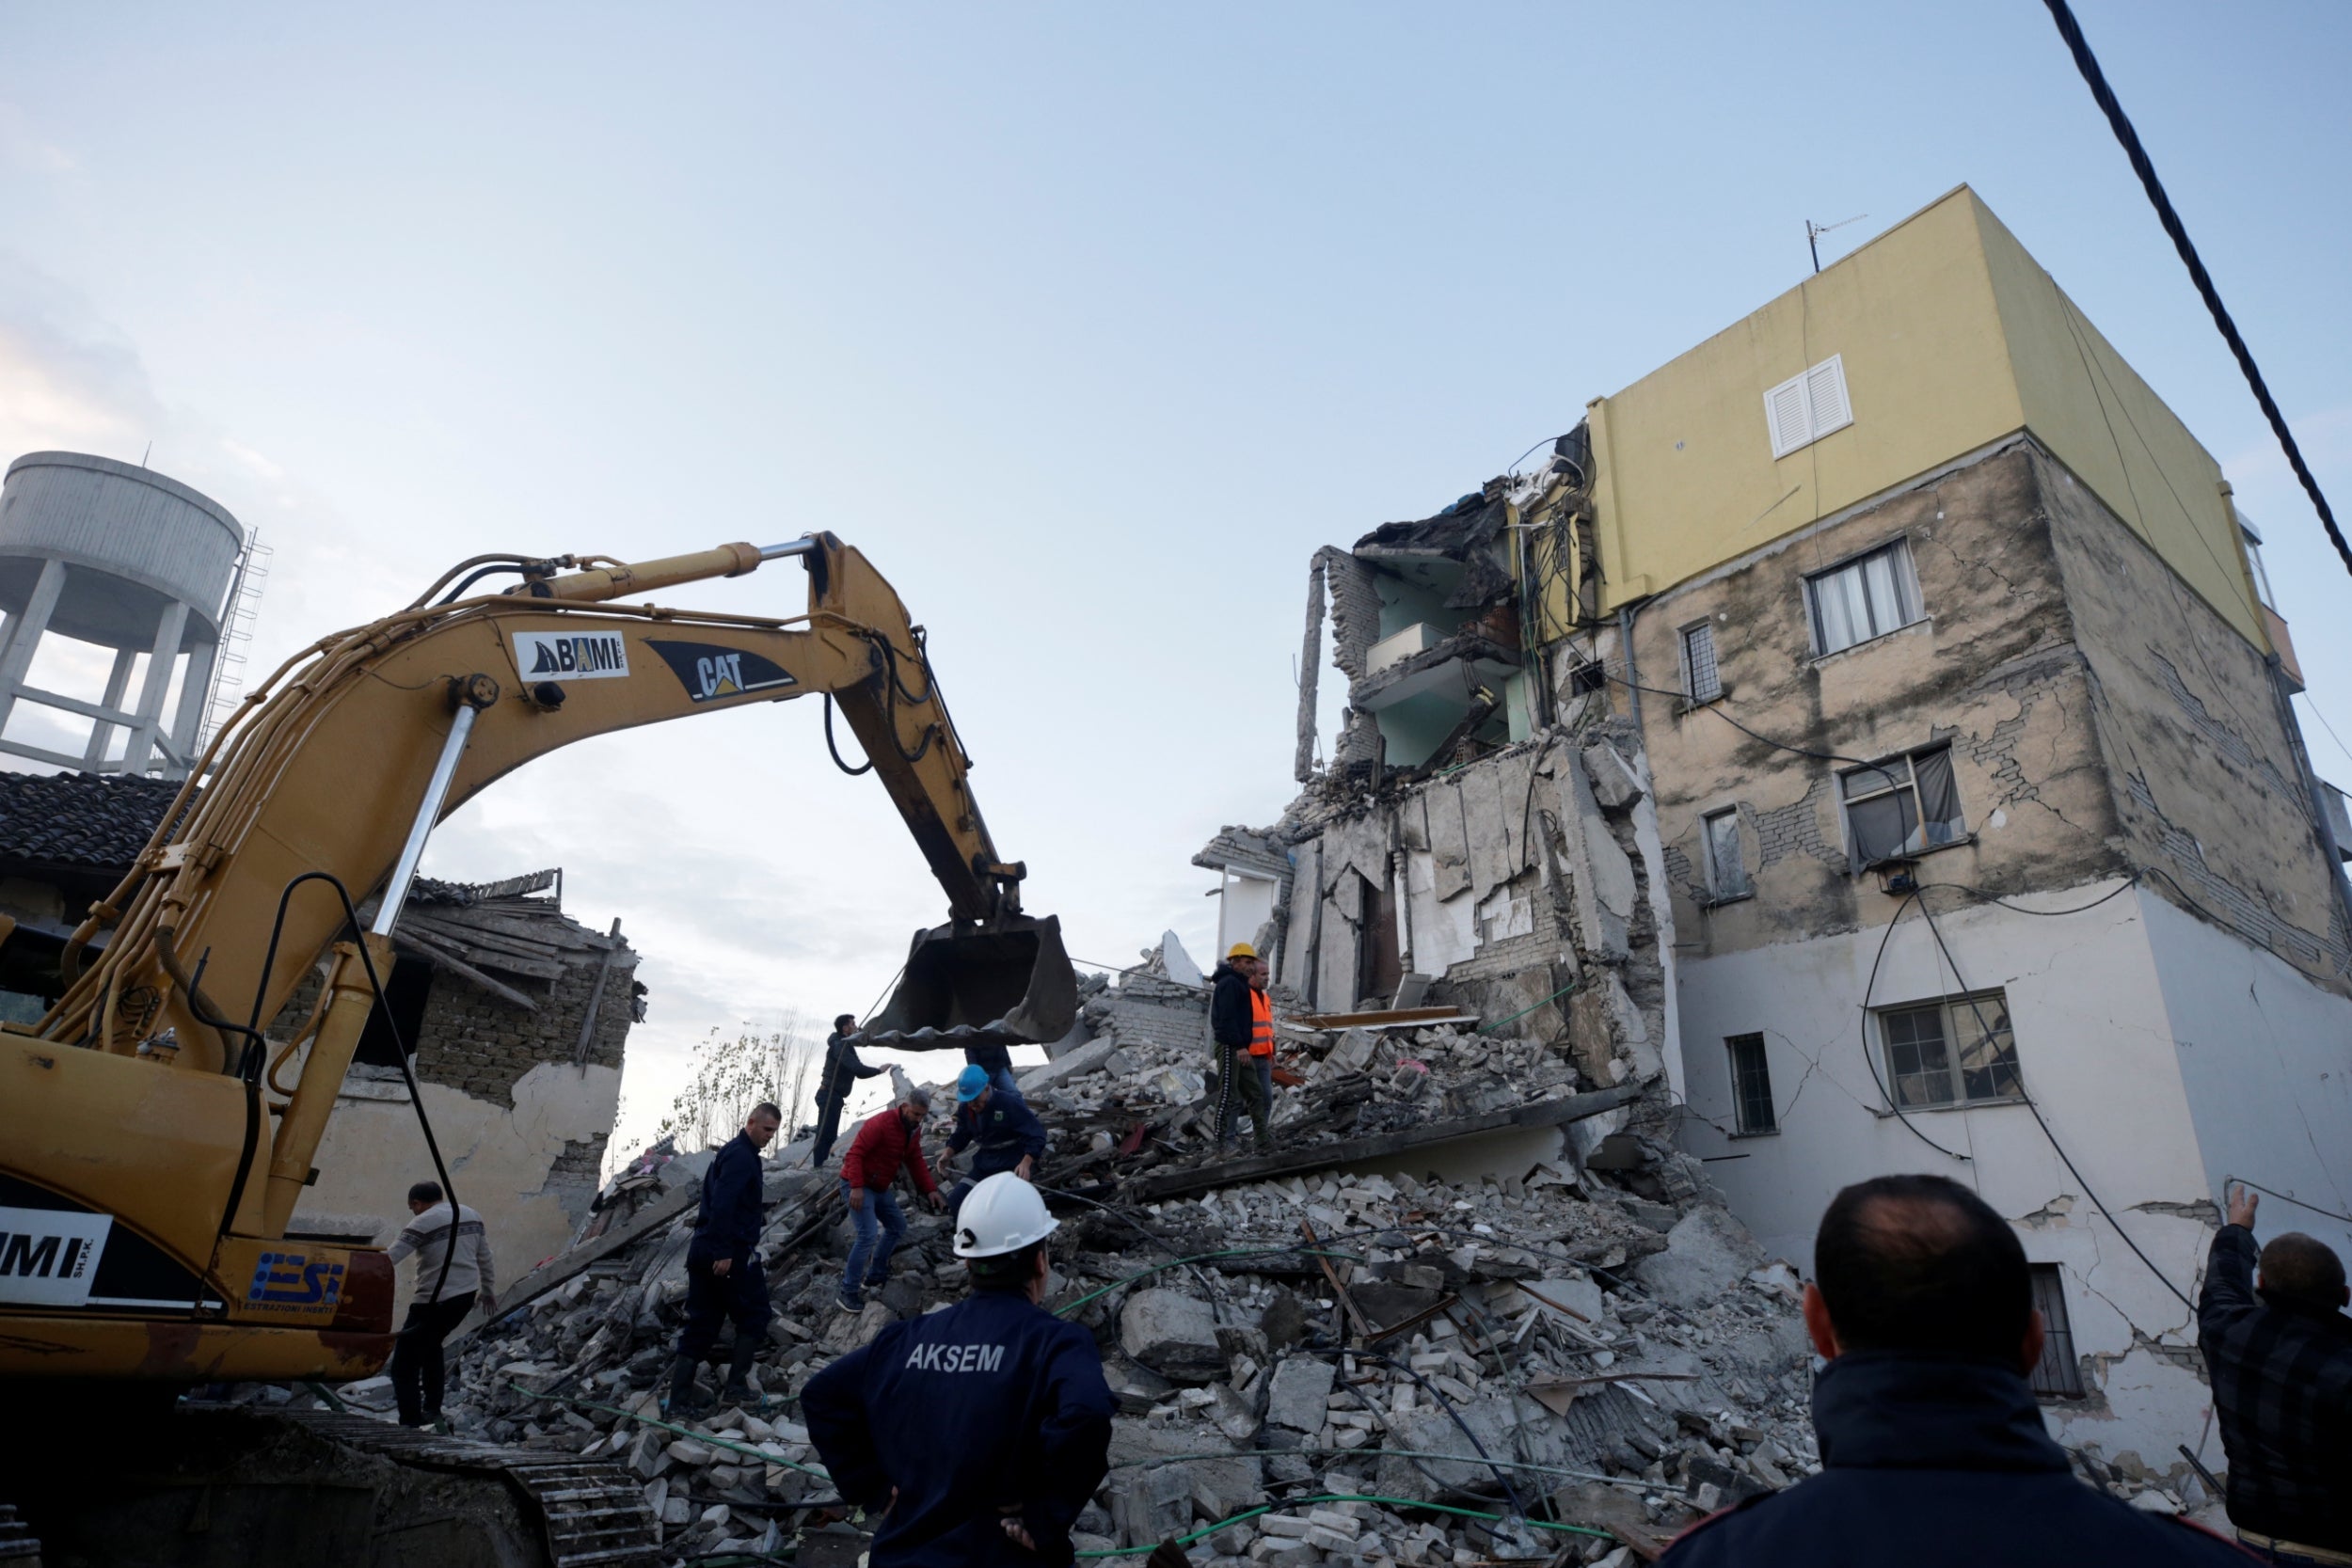 Albania earthquake biggest one in decades, kills 13. Image via The Independent.